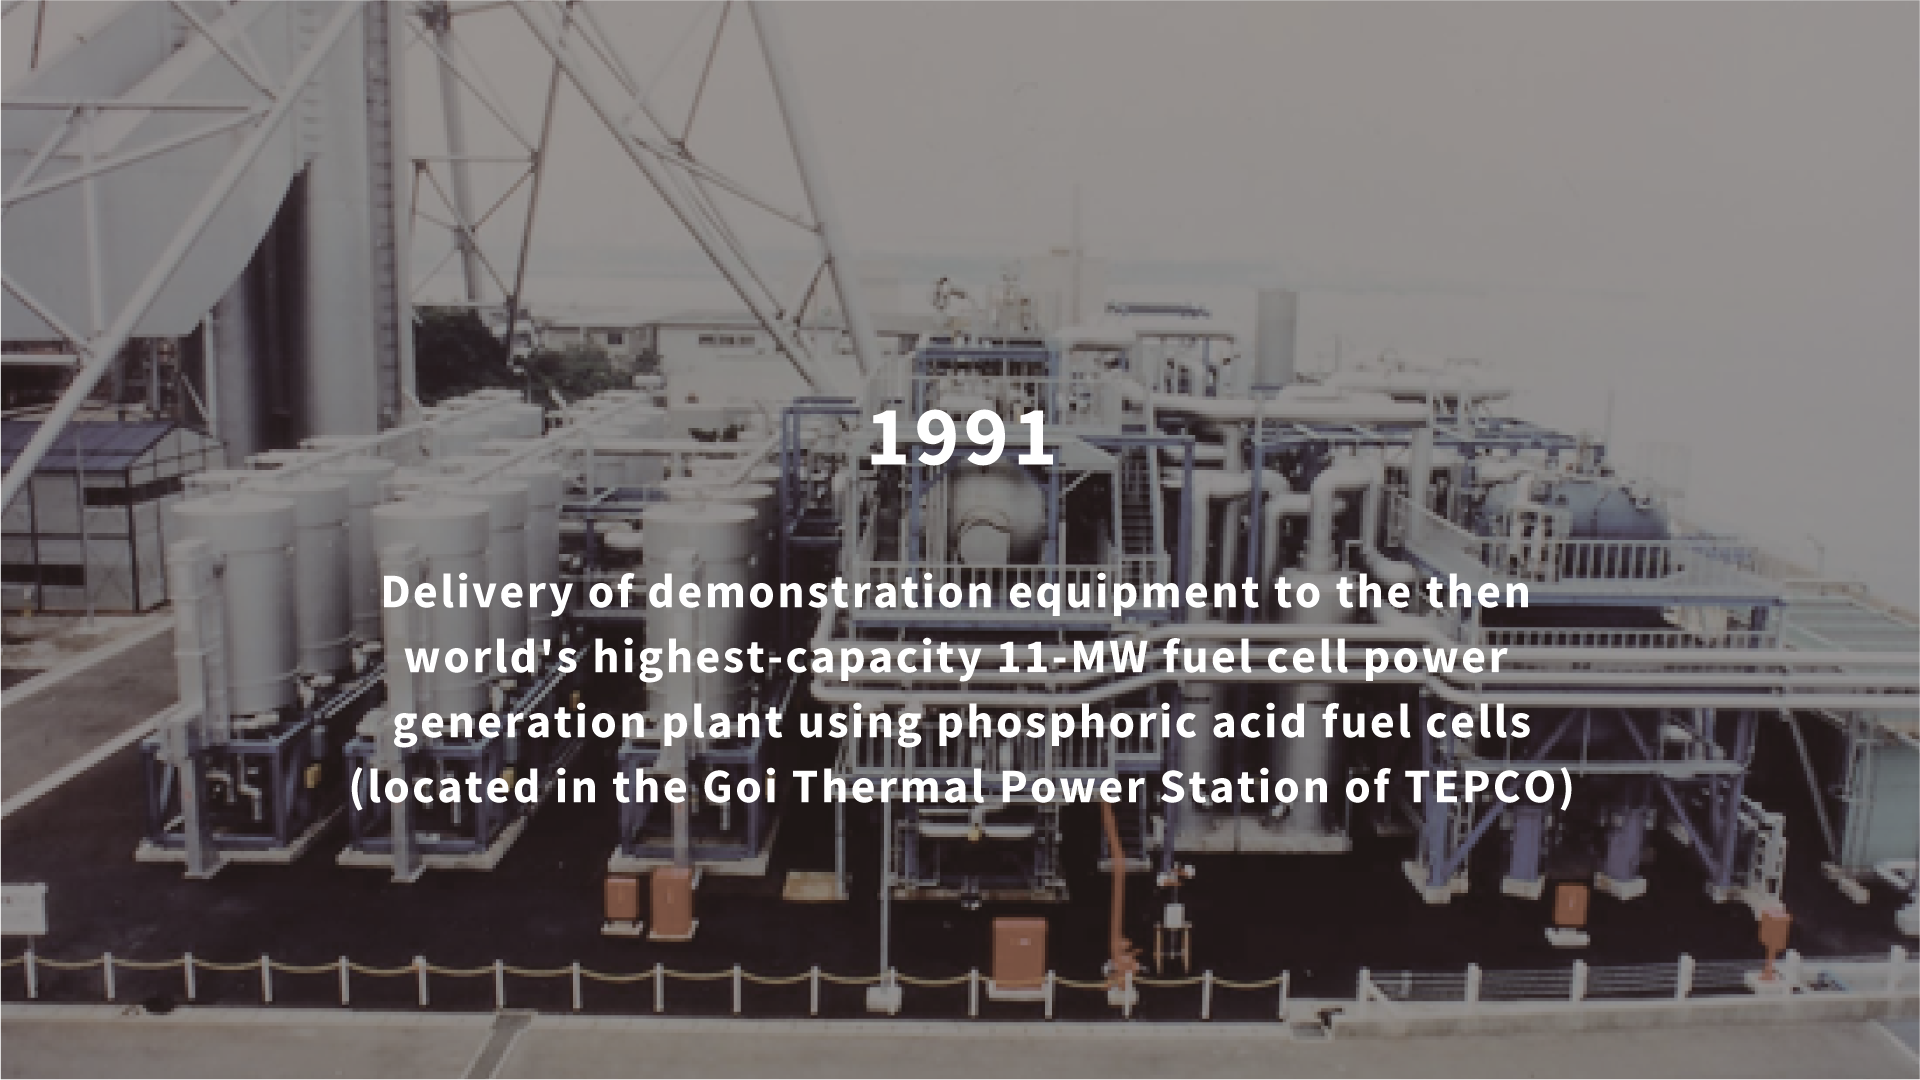 1991 Delivery of demonstration equipment to the then world's highest-capacity 11-MW fuel cell power generation plant using phosphoric acid fuel cells (located in the Goi Thermal Power Station of TEPCO)